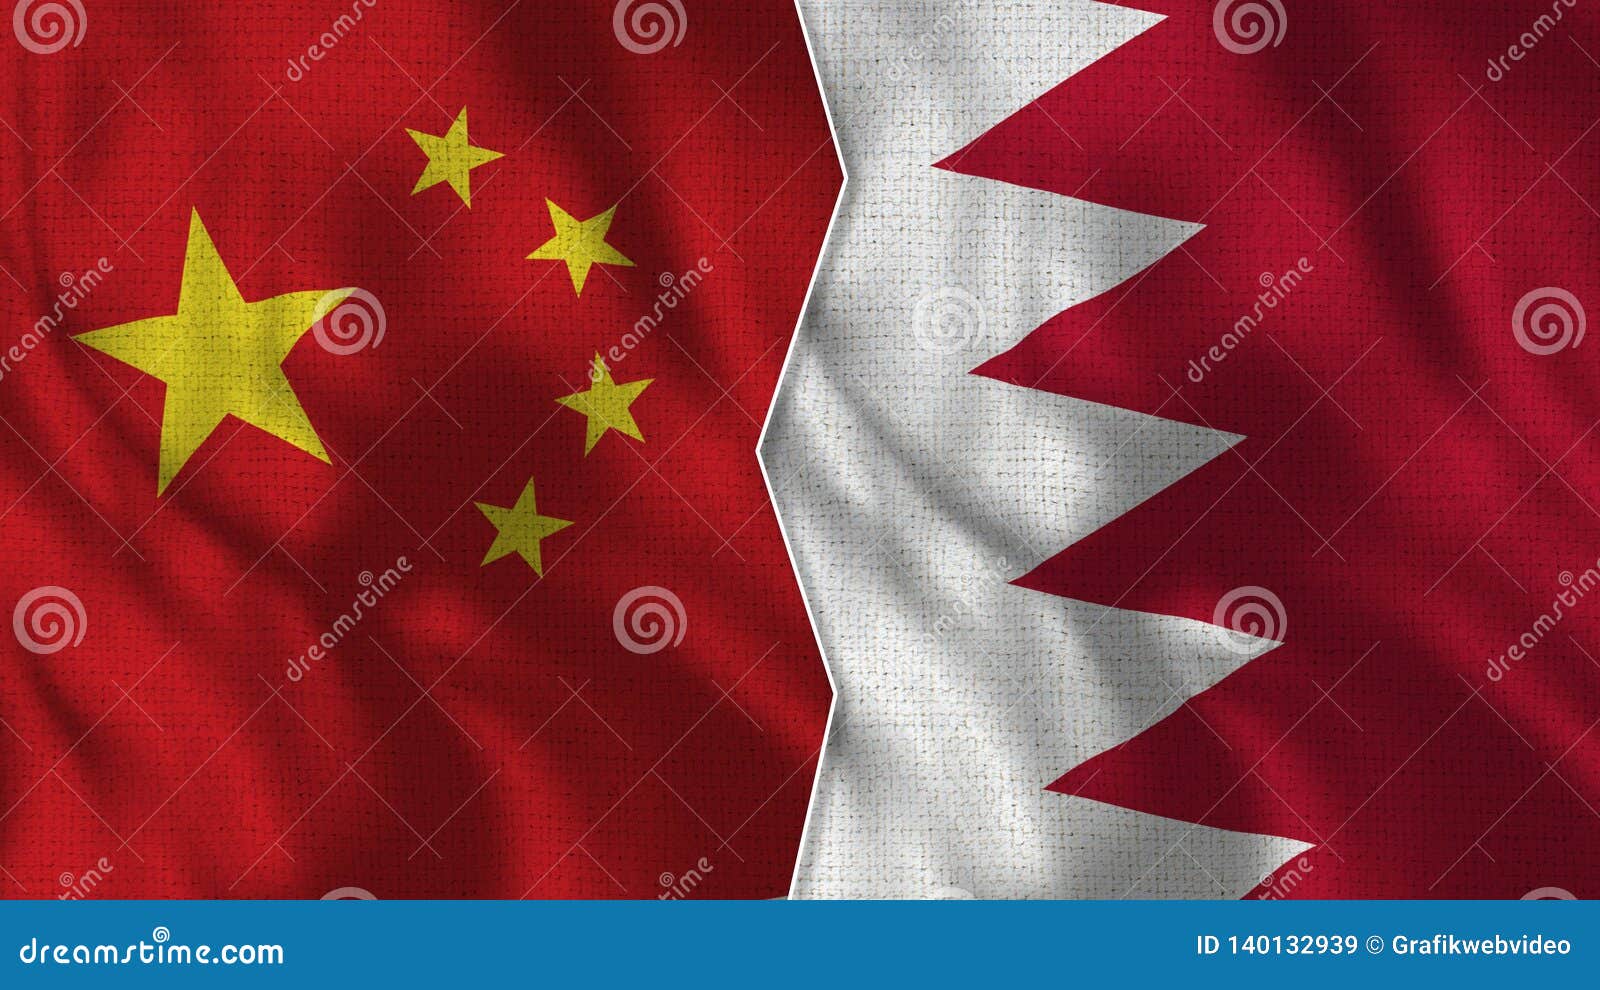 china and bahrein half flags together